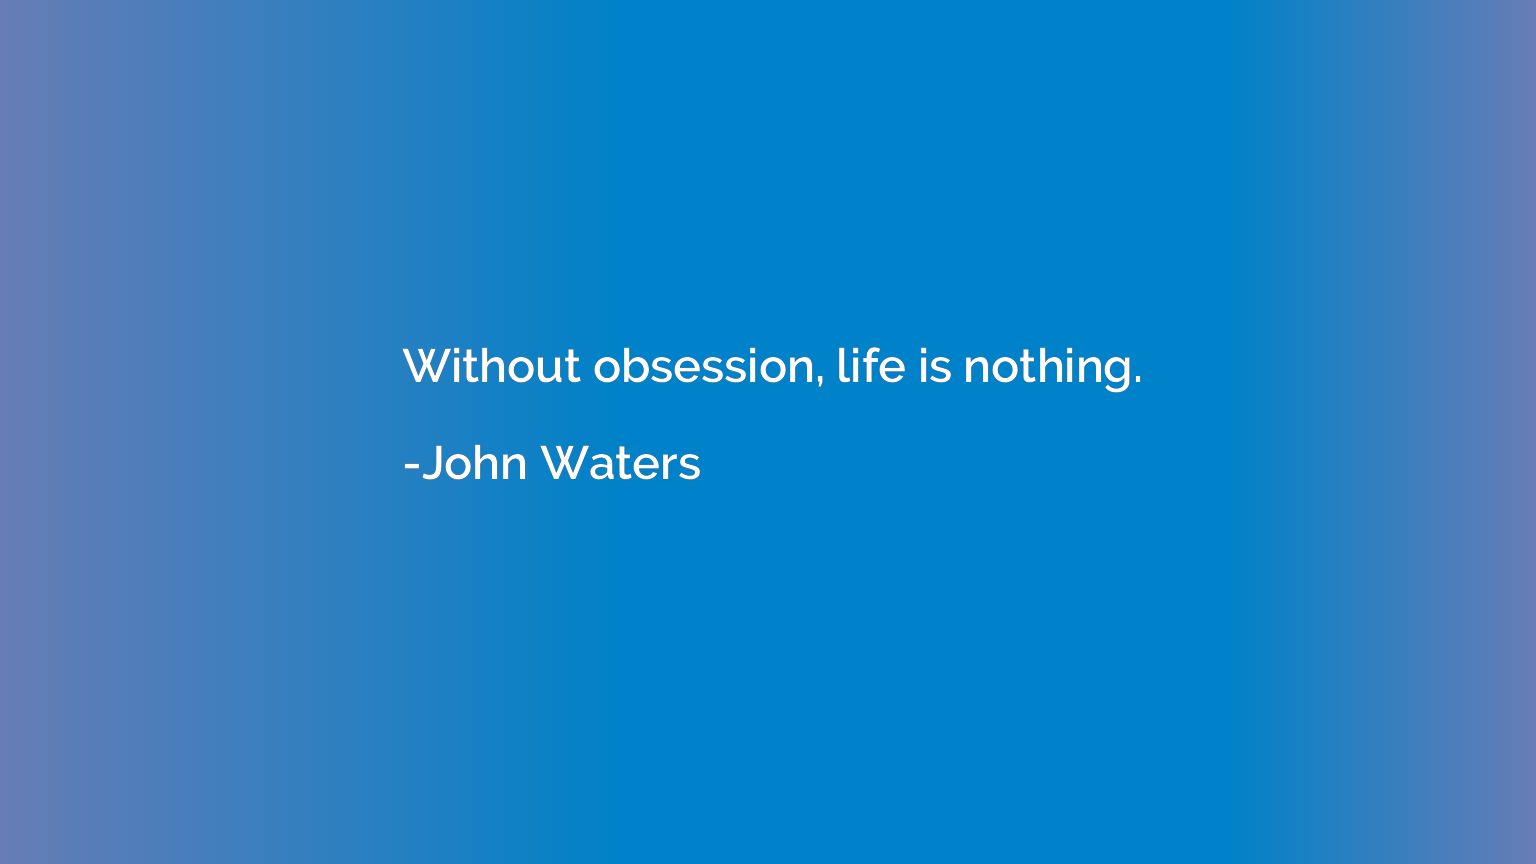 Without obsession, life is nothing.